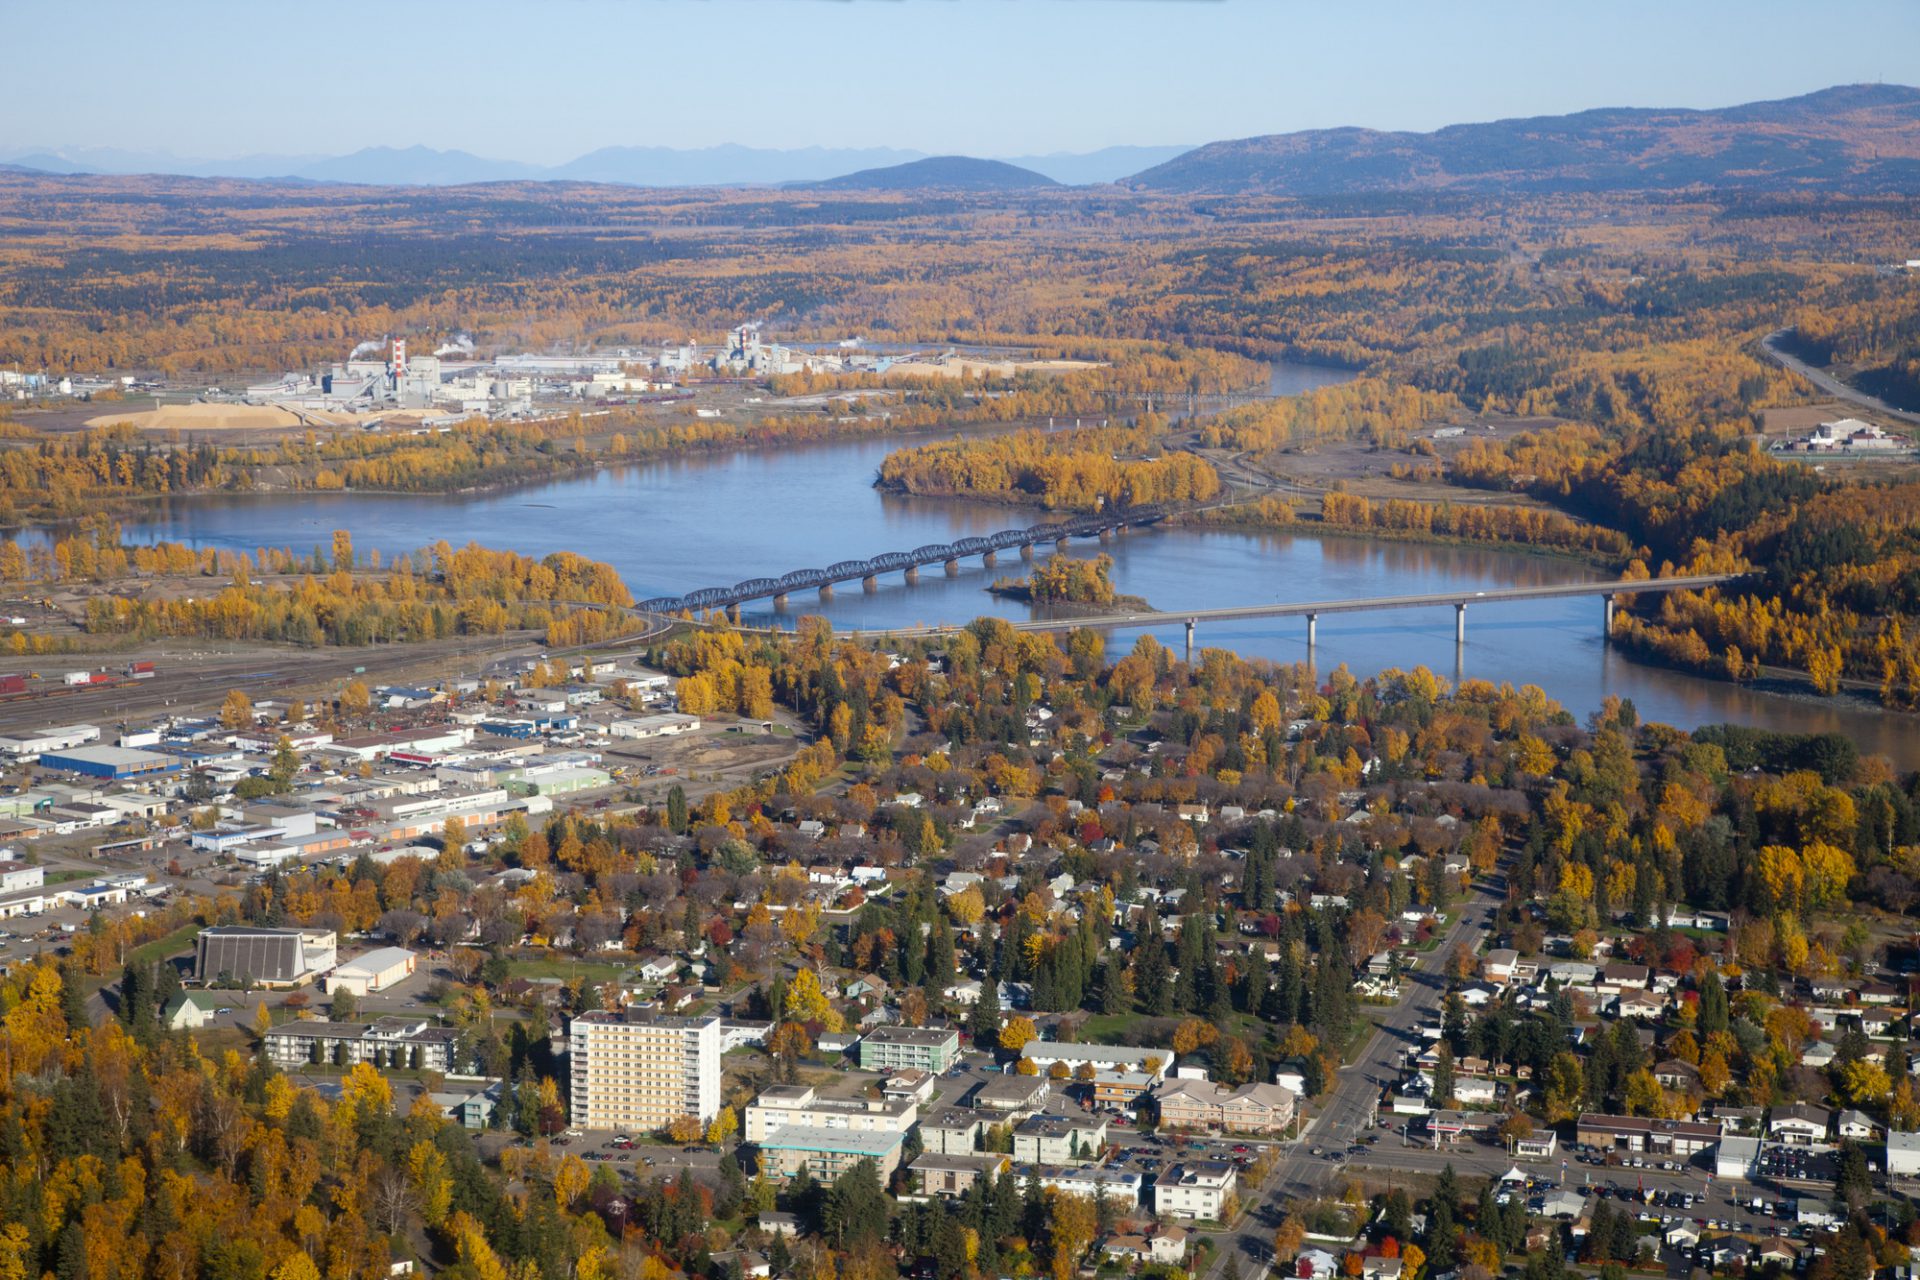 Prince George ranks 11th in Most Dangerous Cities report by Maclean’s Magazine